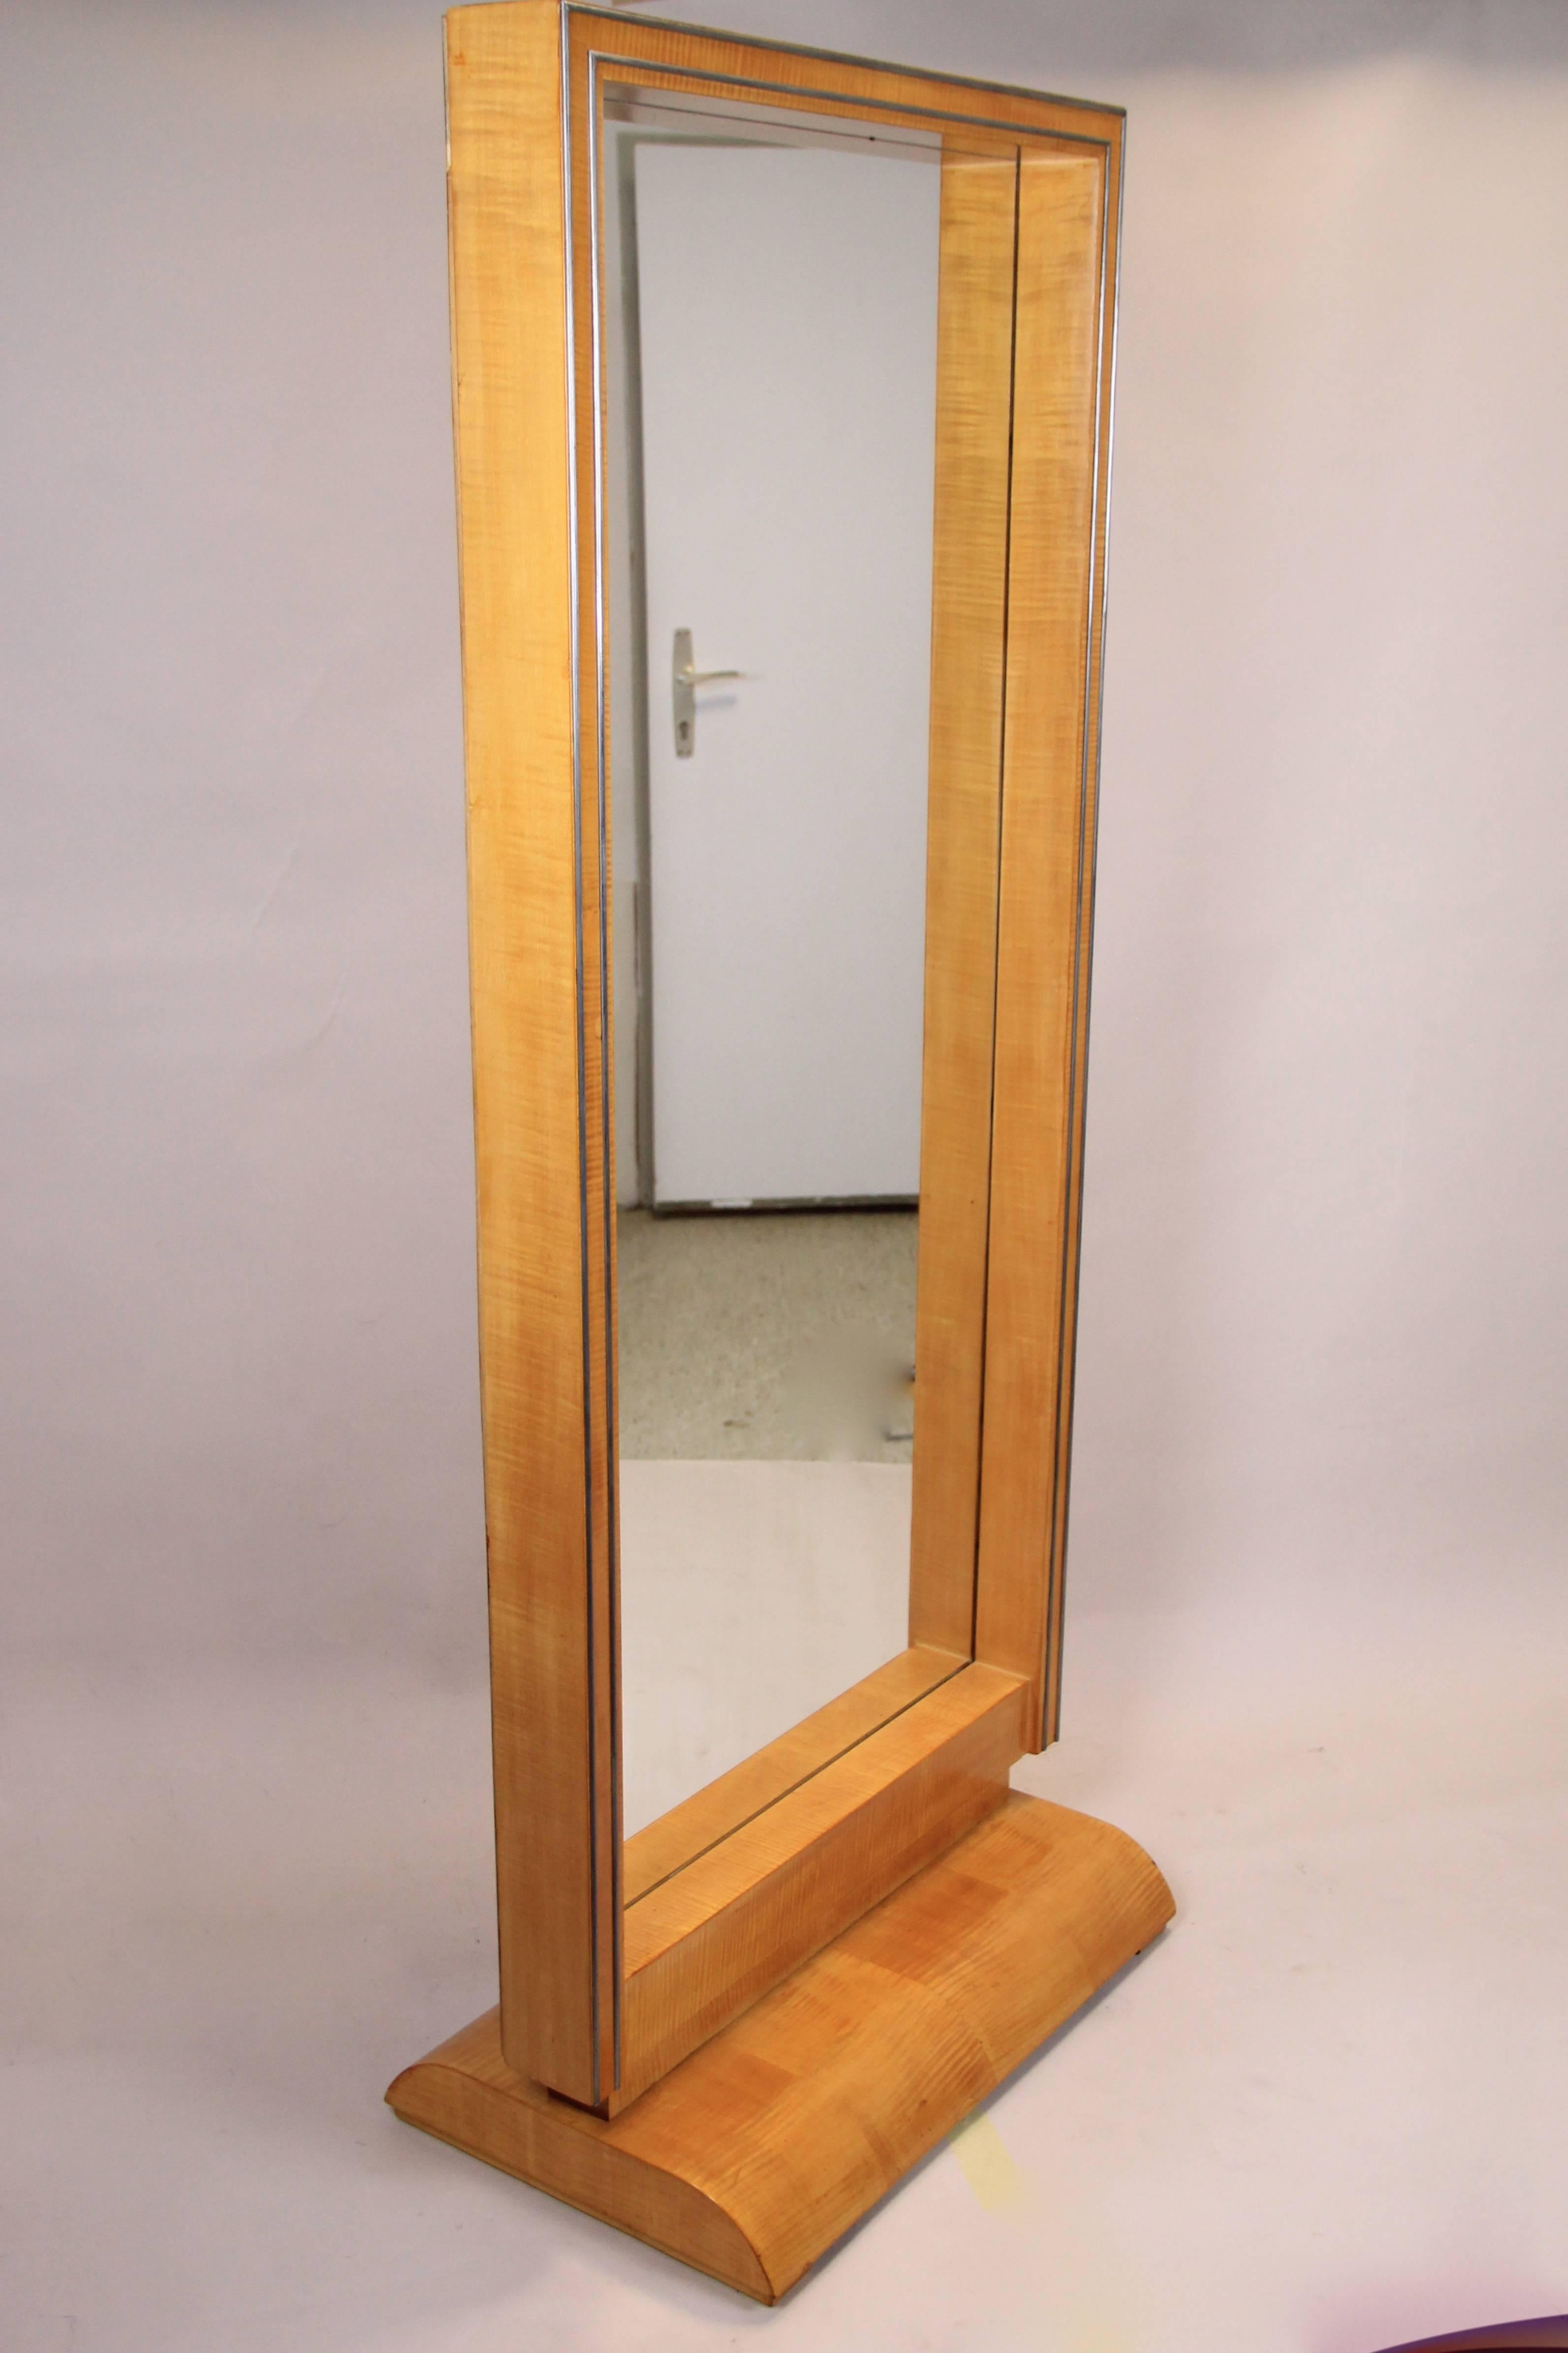 From Austria circa 1930 comes this large freestanding Art Deco Dressing Mirror. The 20th century full-length mirror shows a fantastic timeless design, processed of fine maple wood. The straight shaped broad frame is adorned by two parallel running